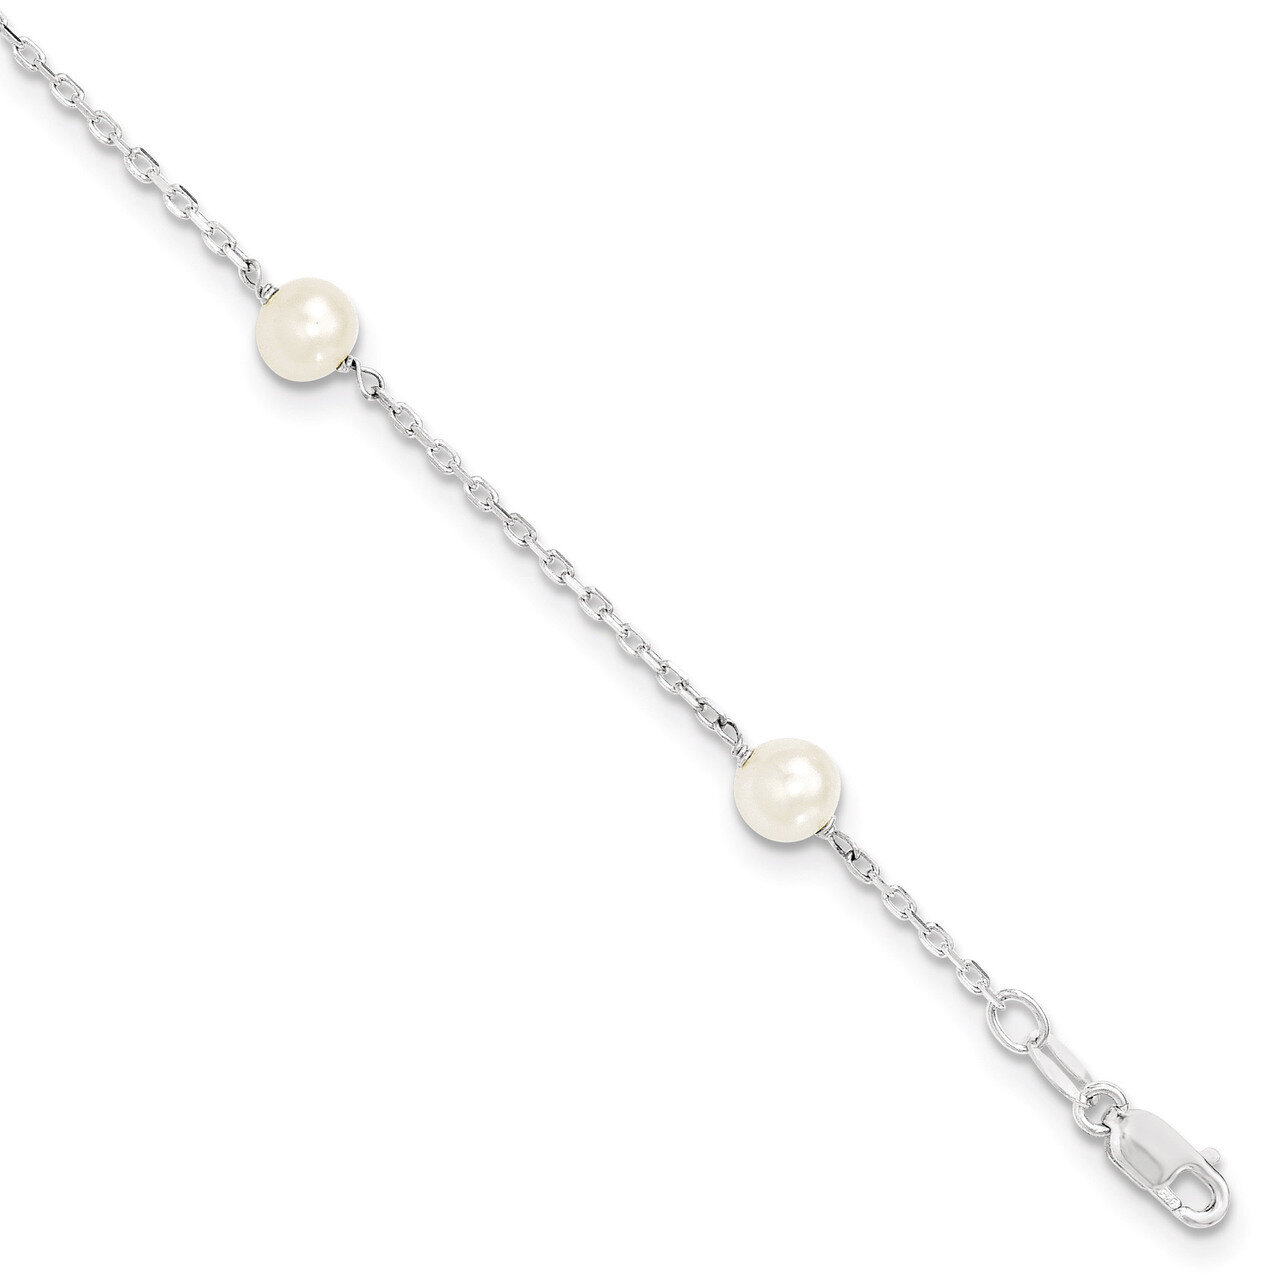 7.5 Inch (5-6mm) Cultured Pearl Bracelet Sterling Silver QH5011-7.5